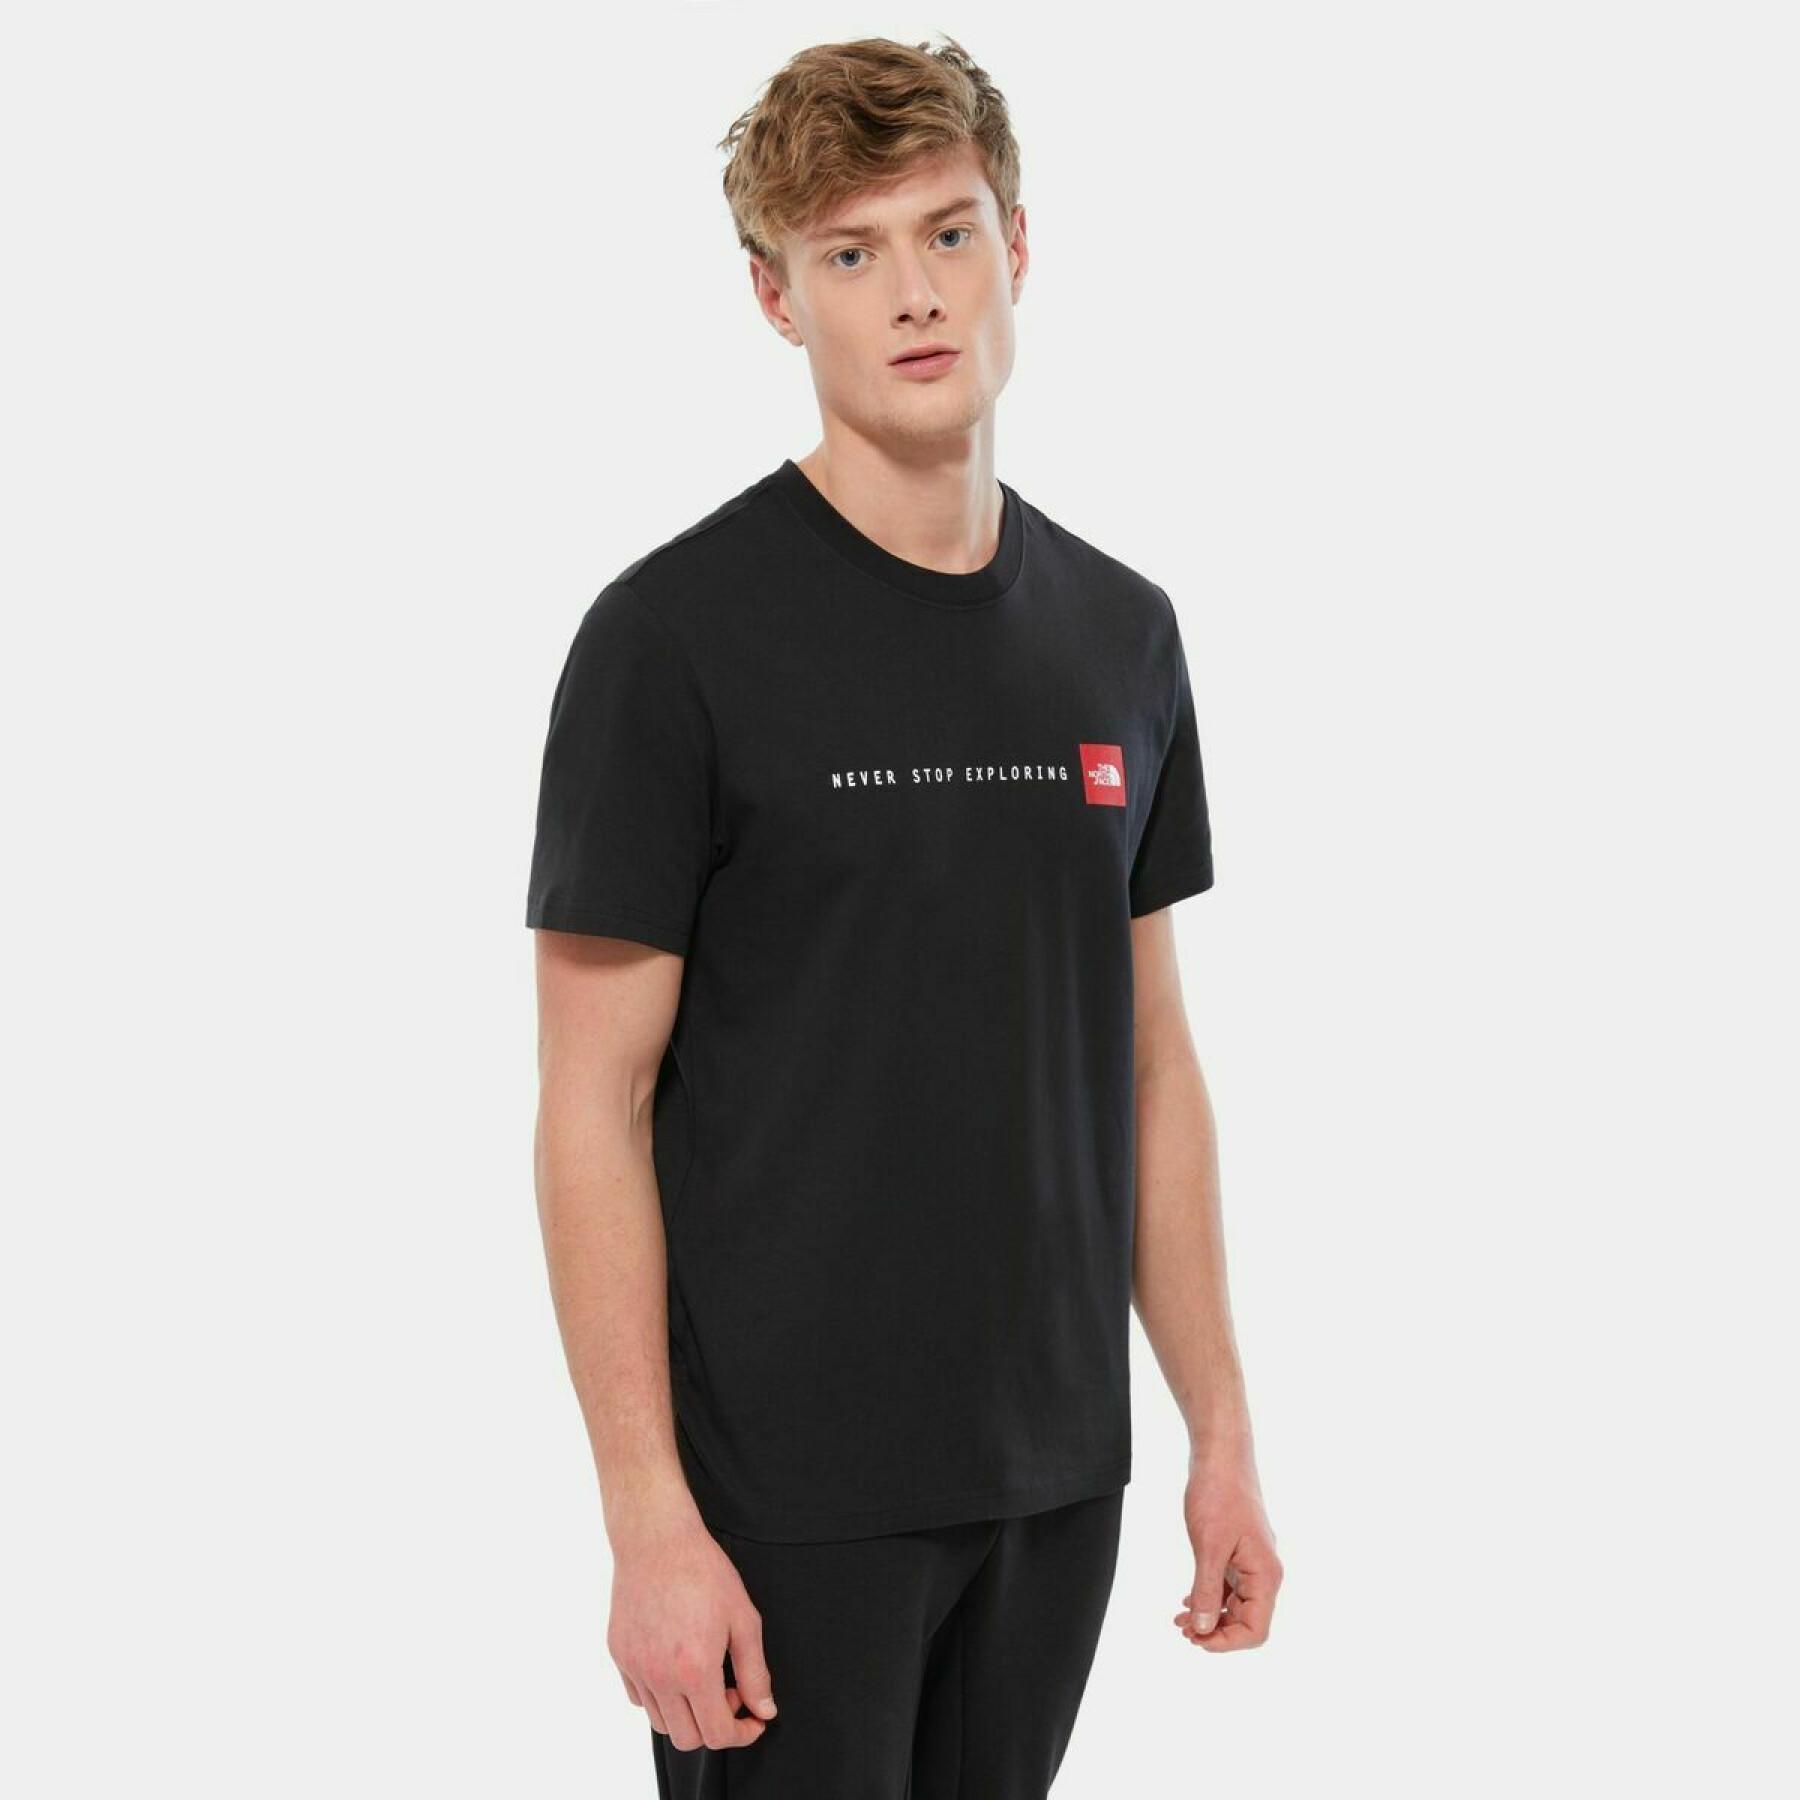 Klassisk T-shirt The North Face "Never Stop Exploring"